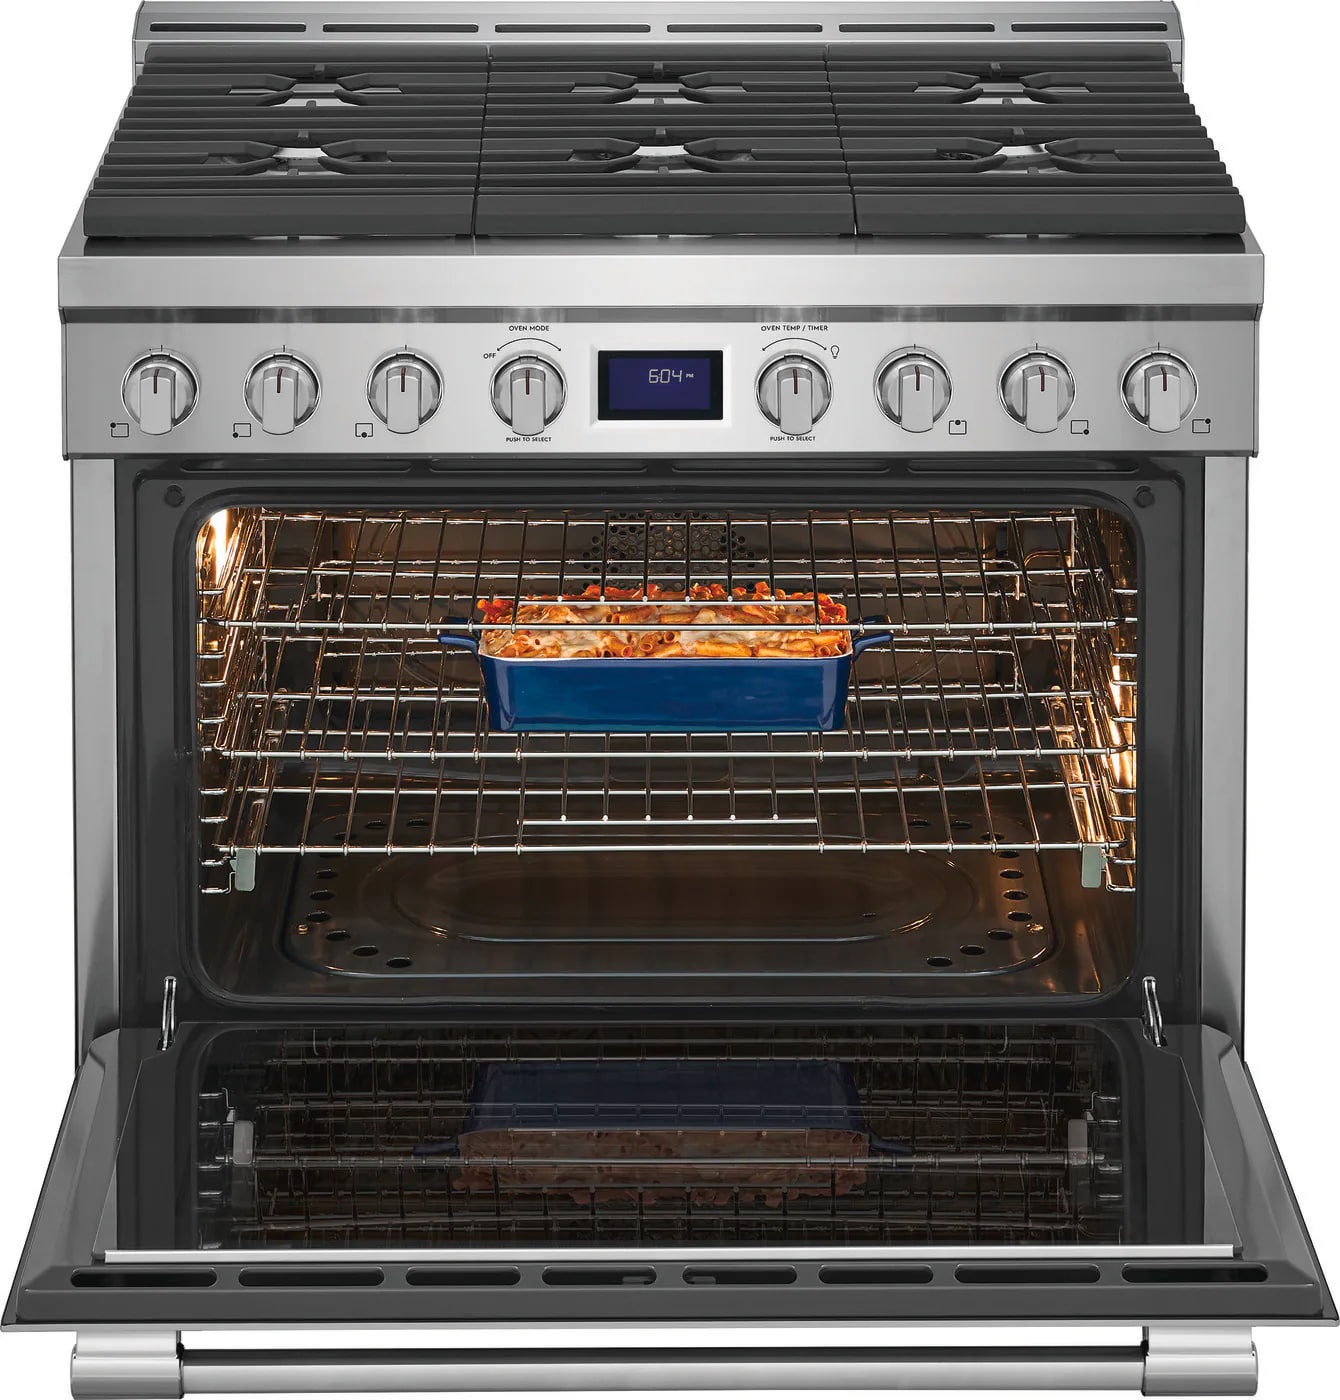 Frigidaire Professional - 4.4 cu. ft  Gas Range in Stainless - PCFG3670AF